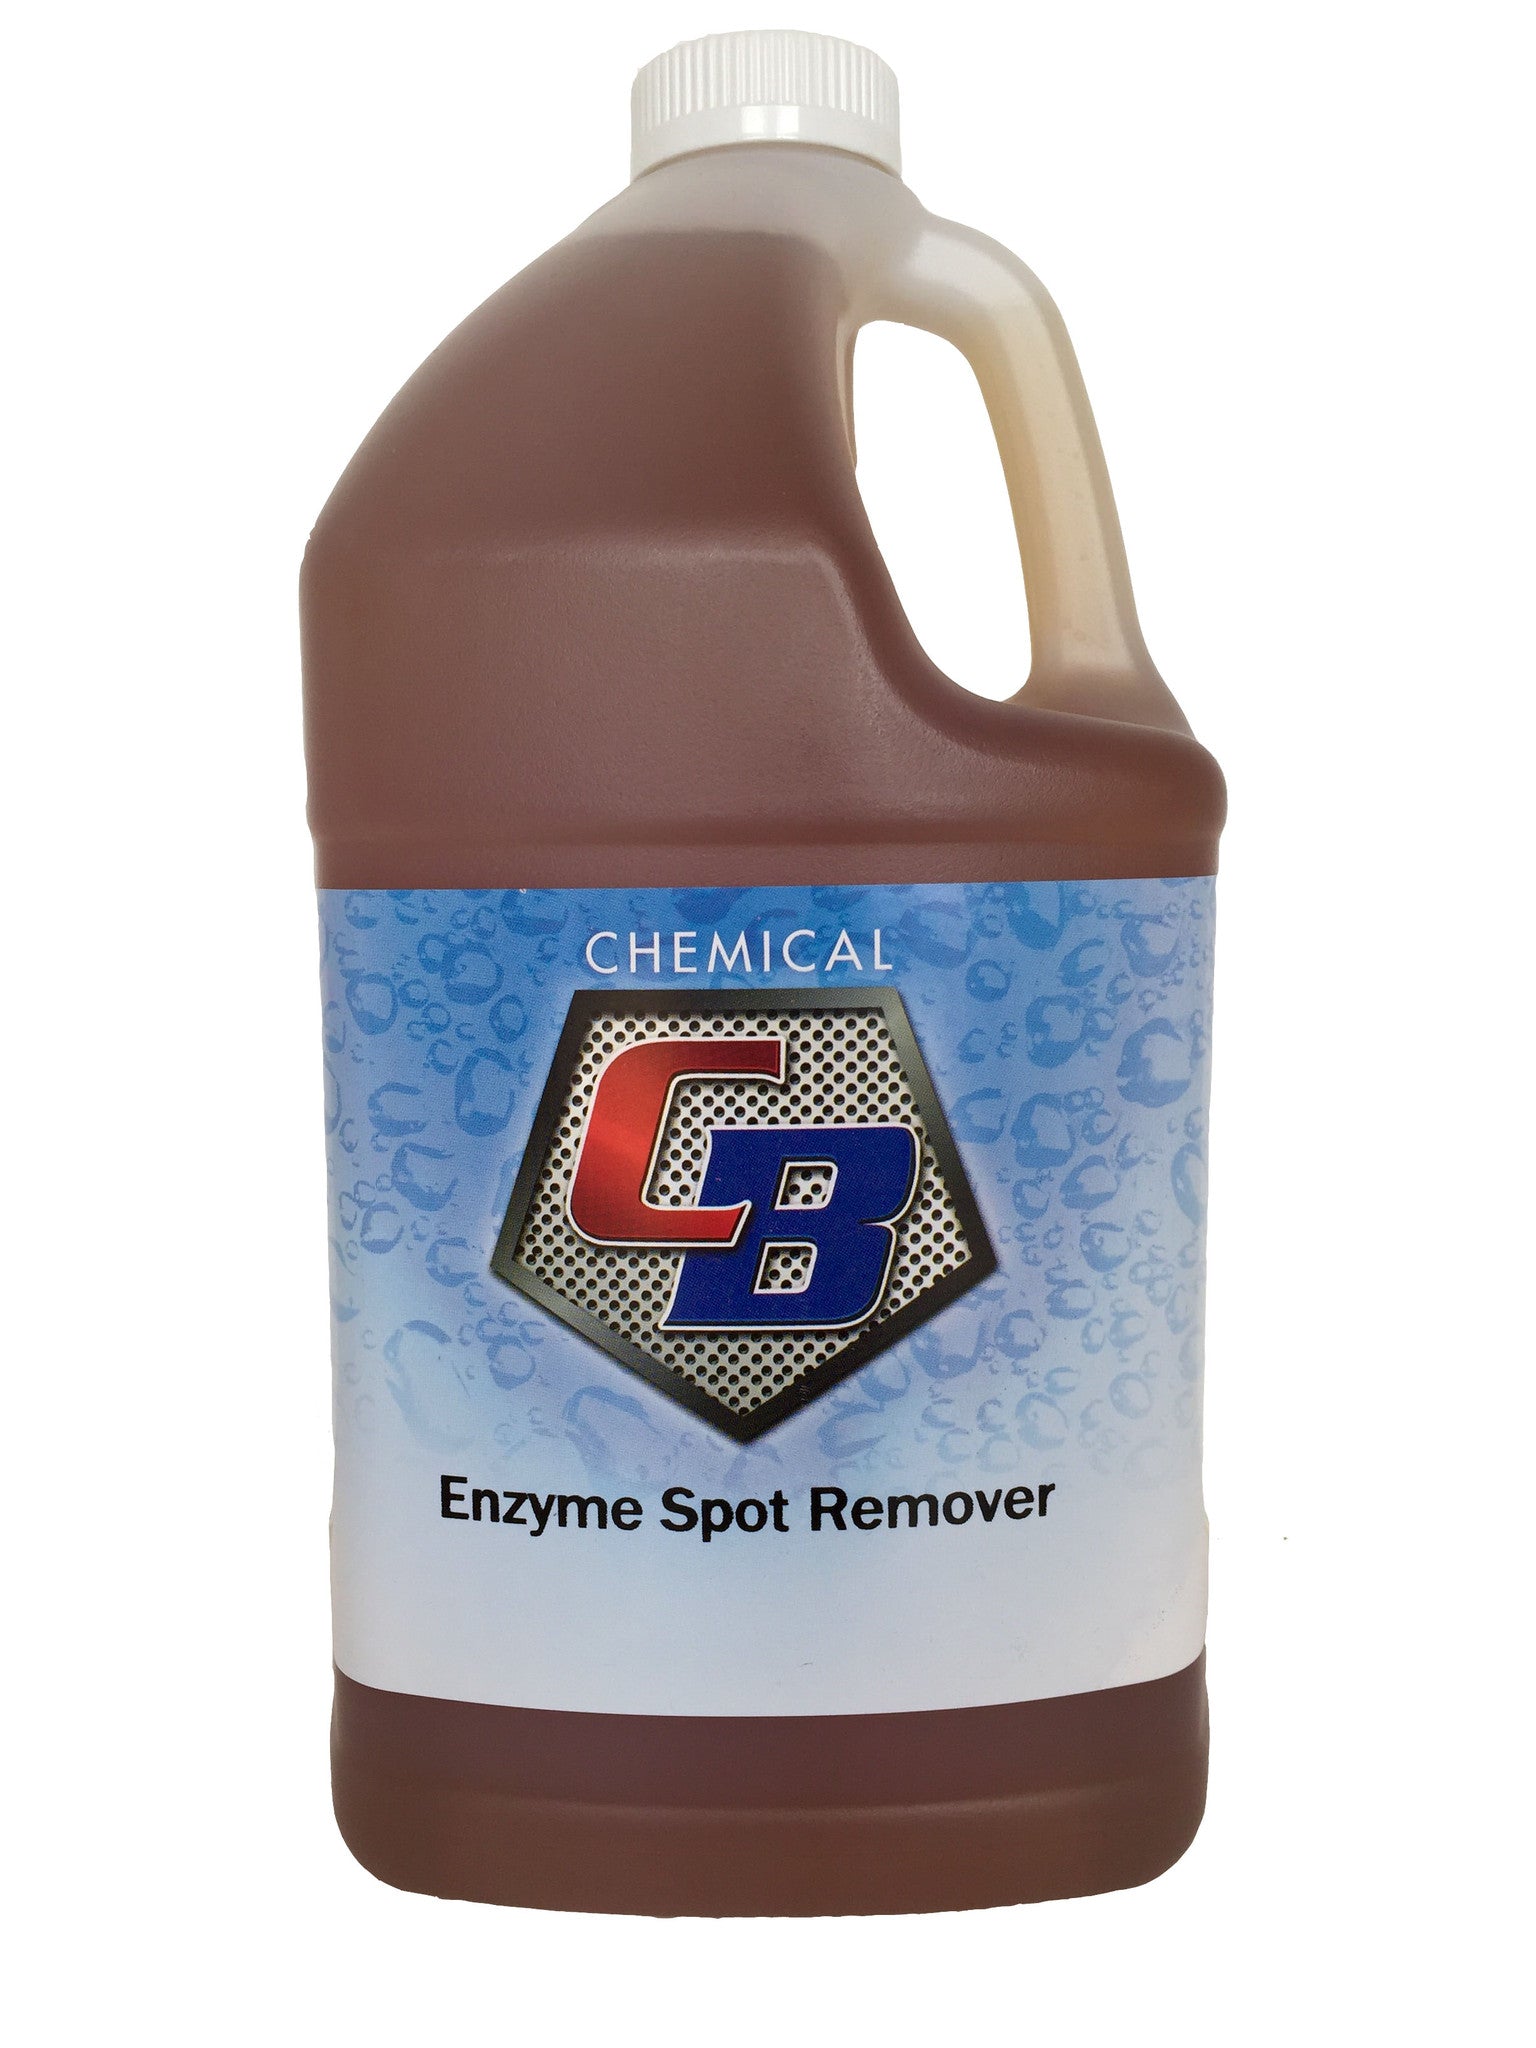 Enzyme Spot Remover - C & B Chemical, Inc